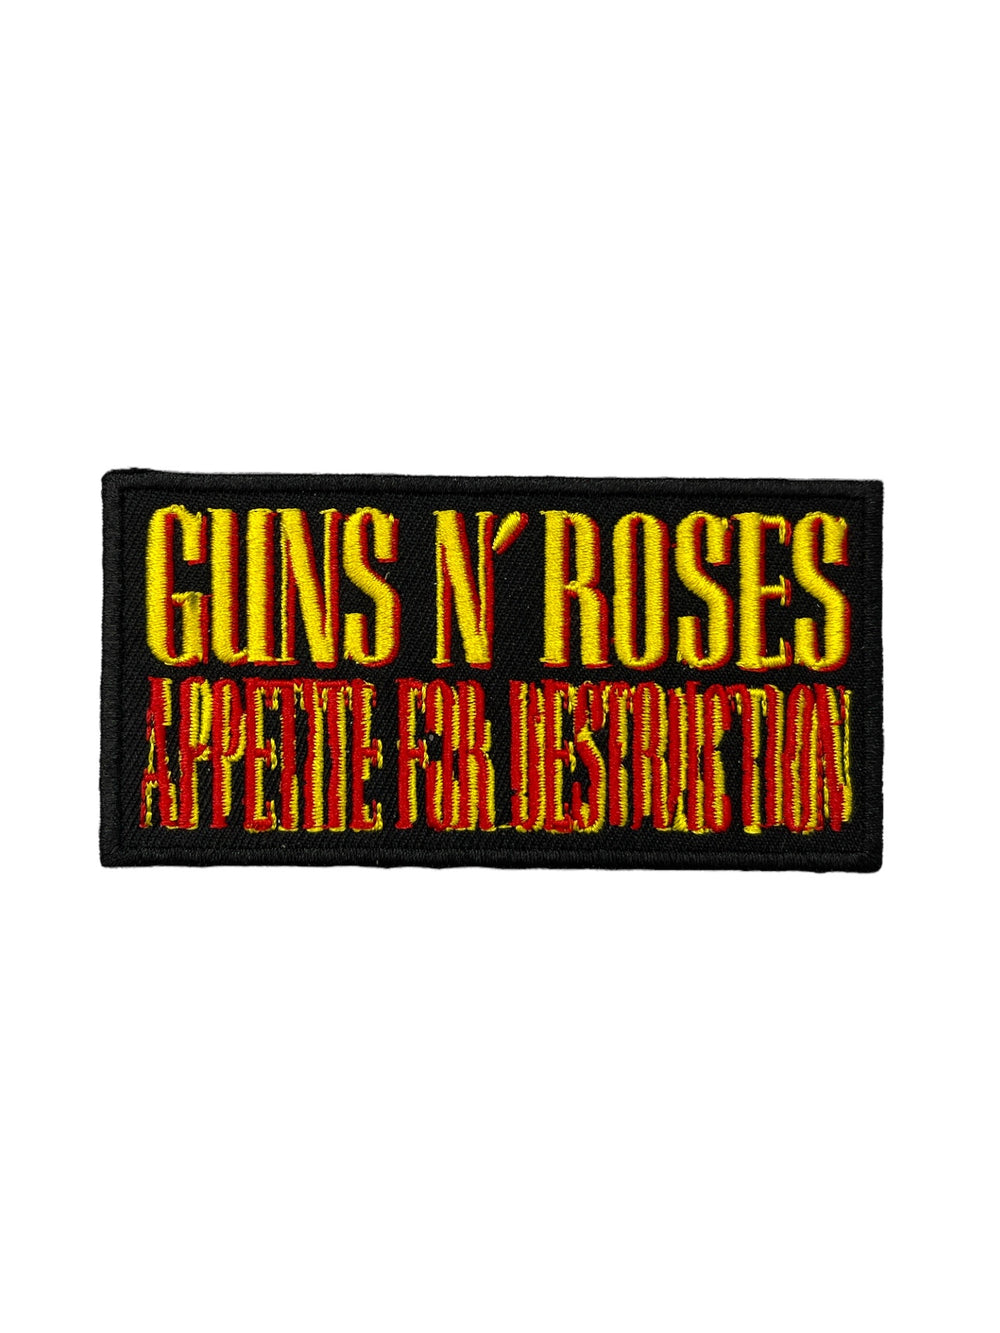 Guns N Roses Appetite For Destruction Official Woven Patch Brand New